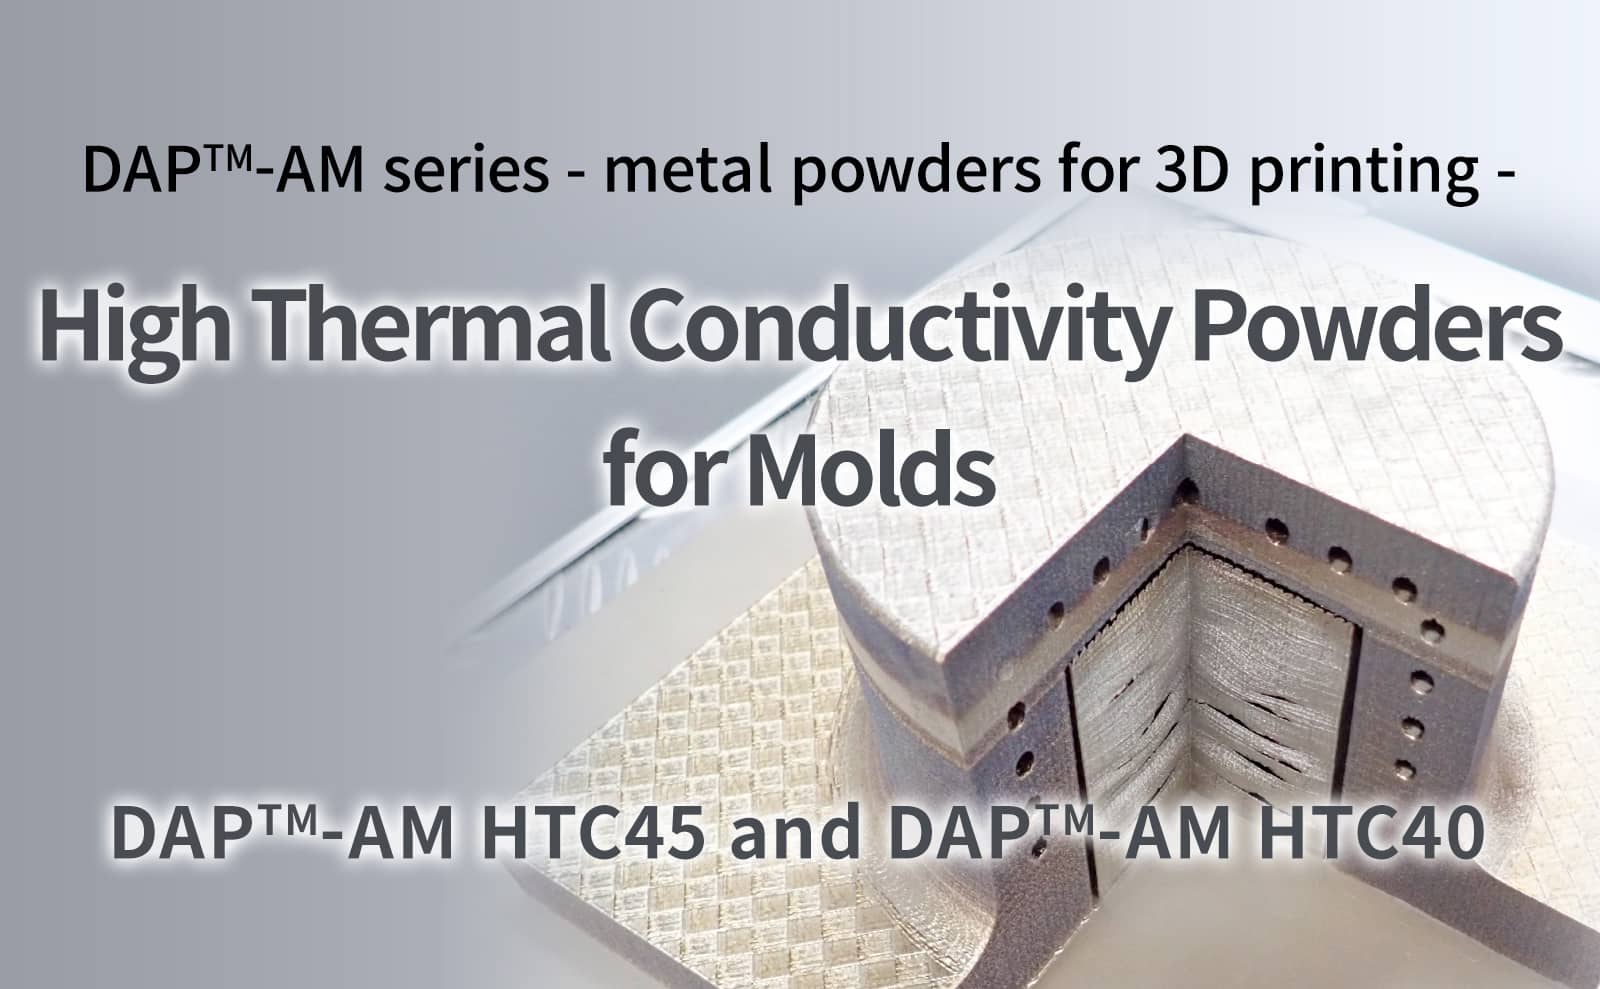 High Thermal Conductivity Powders for Molds